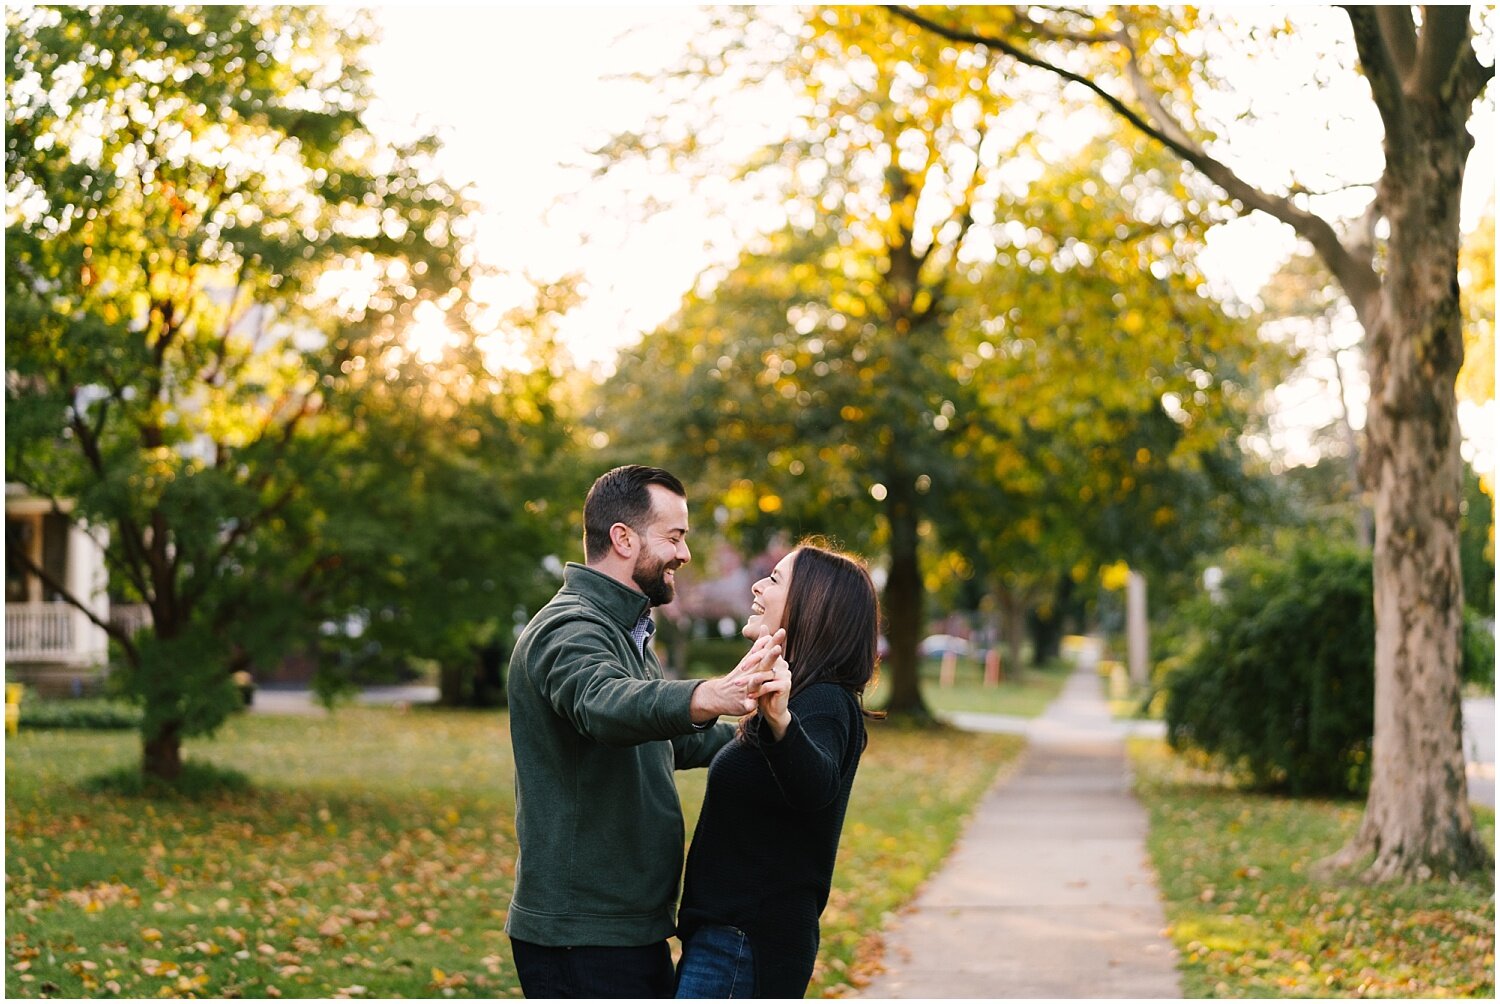 living+roots+wine+engagement+session+rochester+ny+wedding+photographer (23).jpg